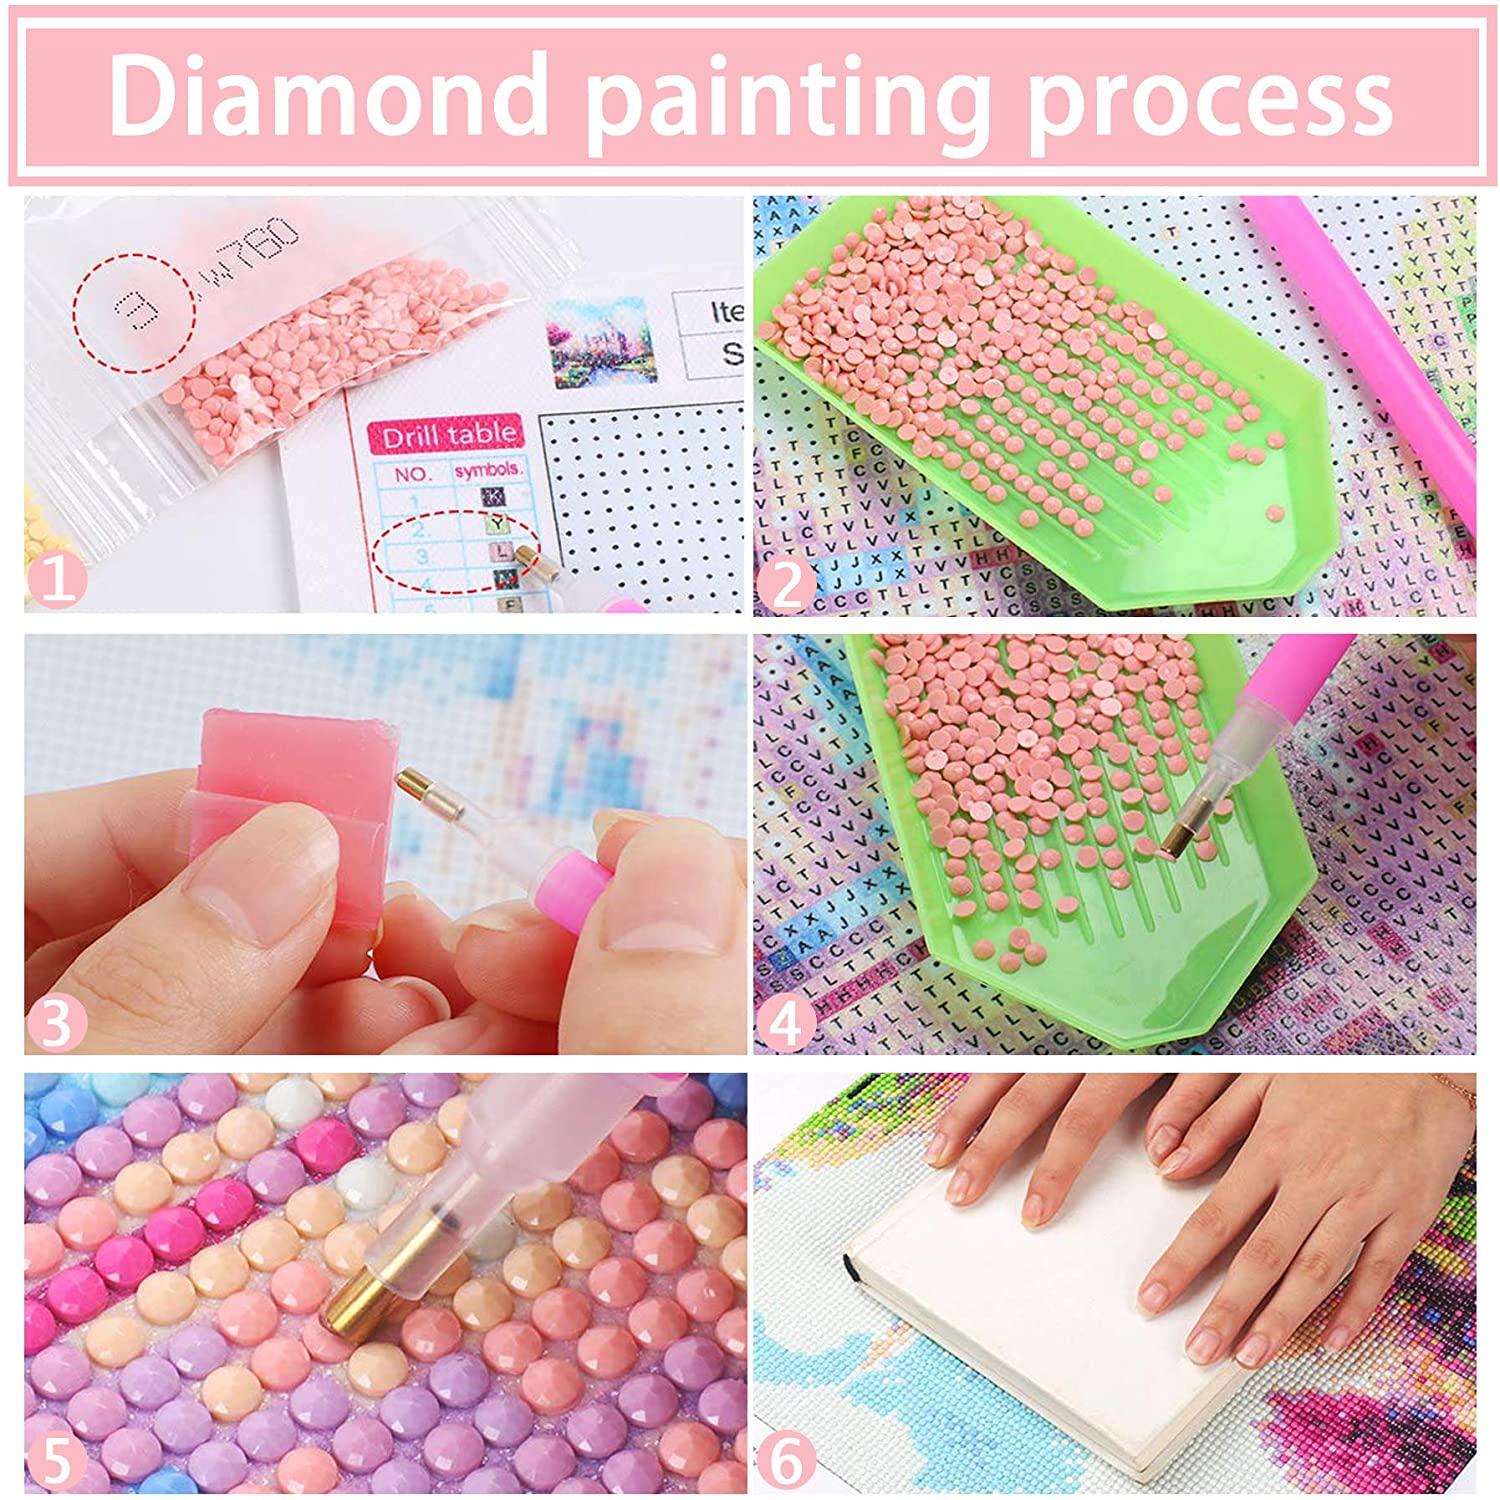 Bimkole 5D Diamond Painting Angel Little Girl Full Drill by Number Kits DIY Rhinestone Pasted 12x16inch